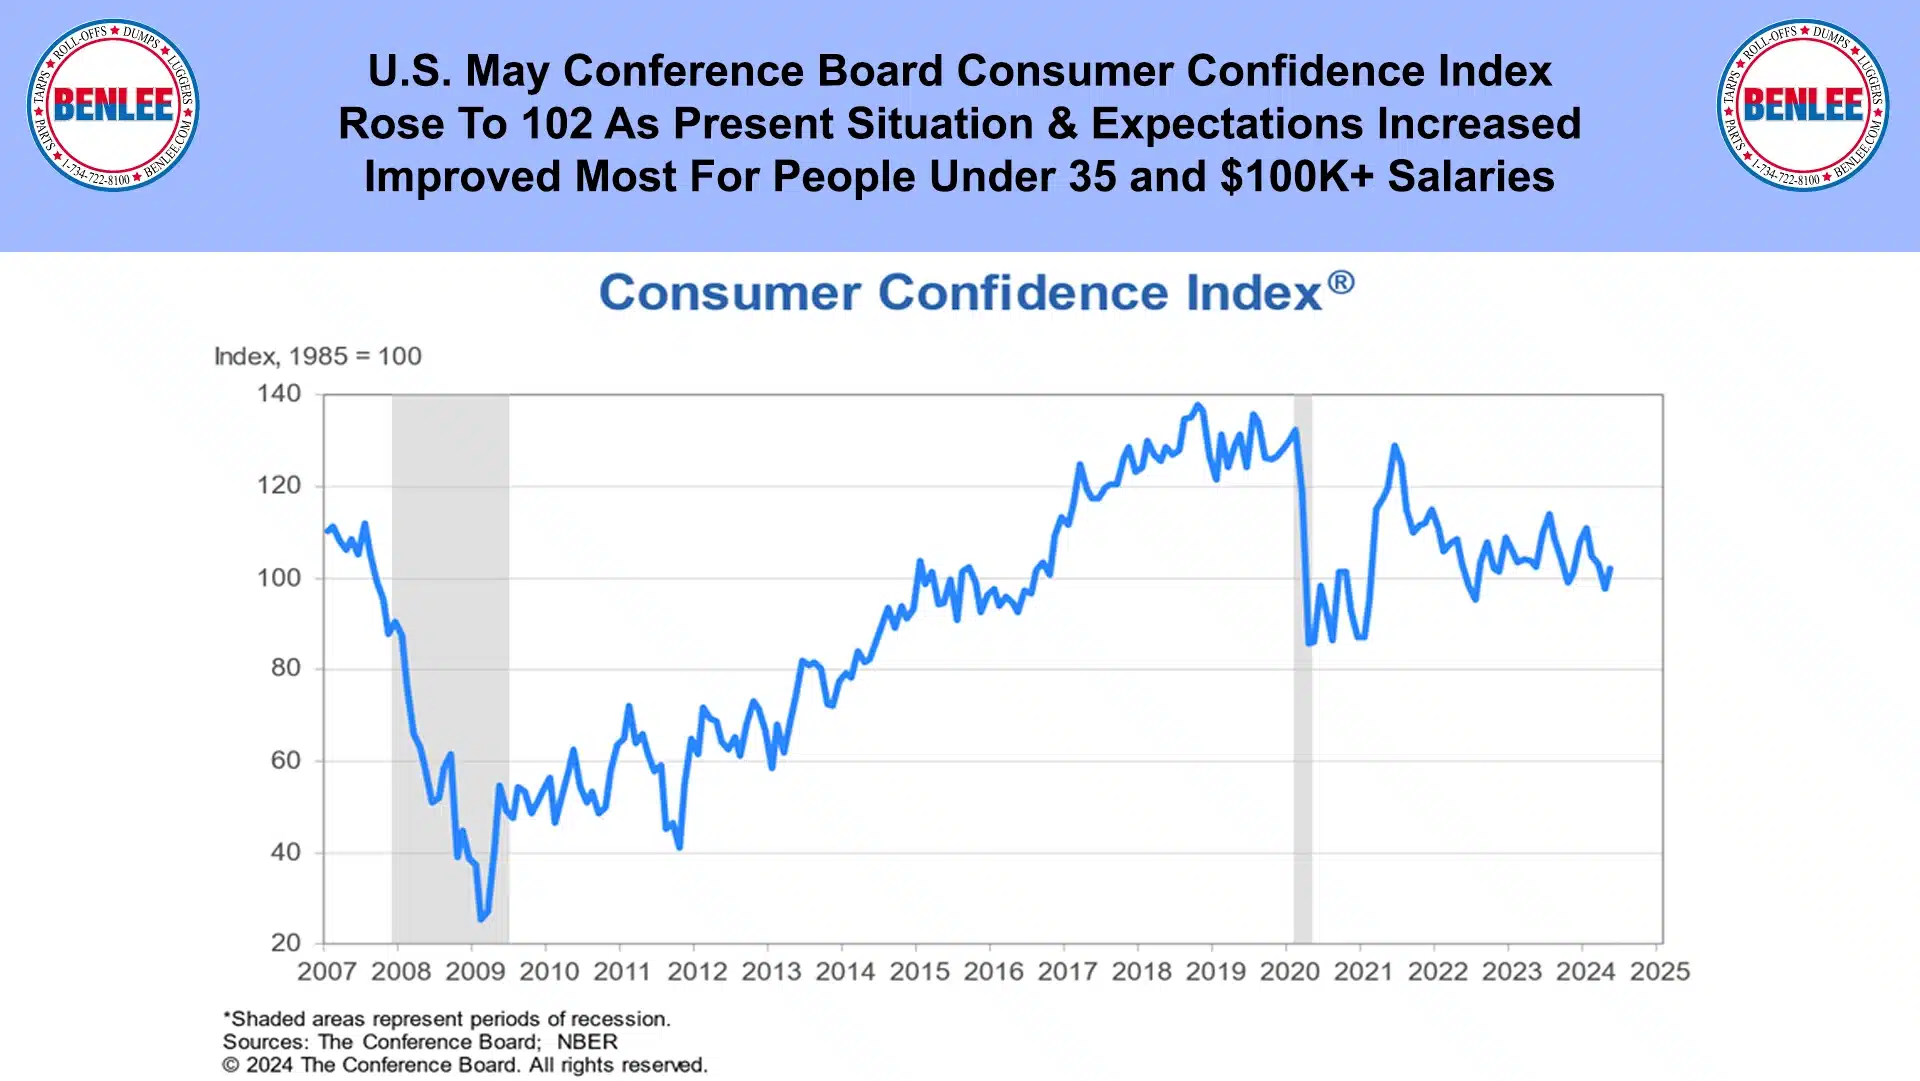 U.S. May Conference Board Consumer Confidence Index